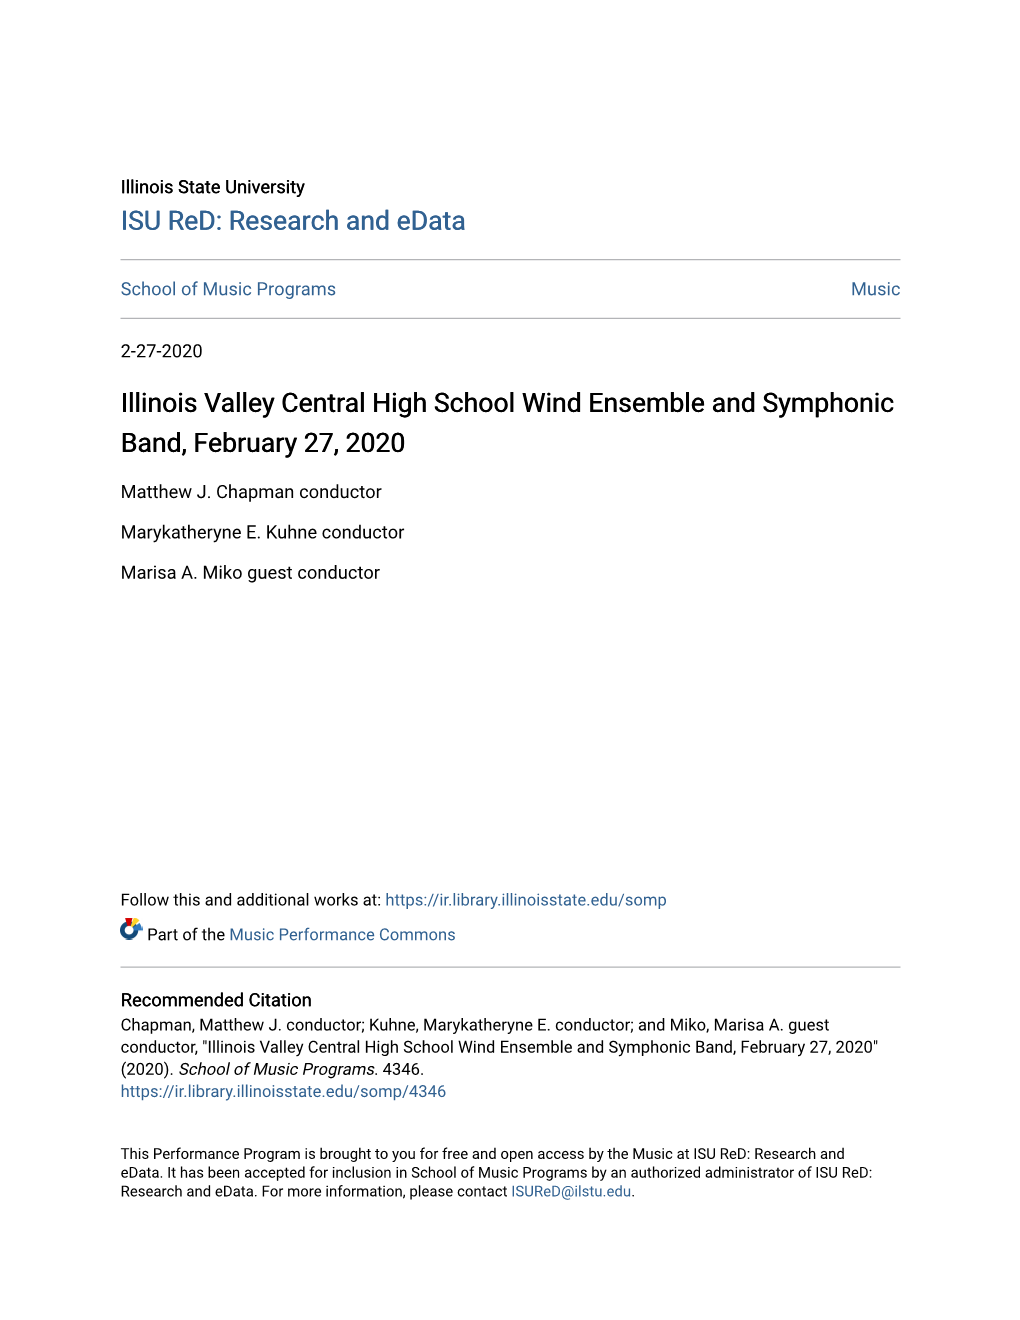 Illinois Valley Central High School Wind Ensemble and Symphonic Band, February 27, 2020